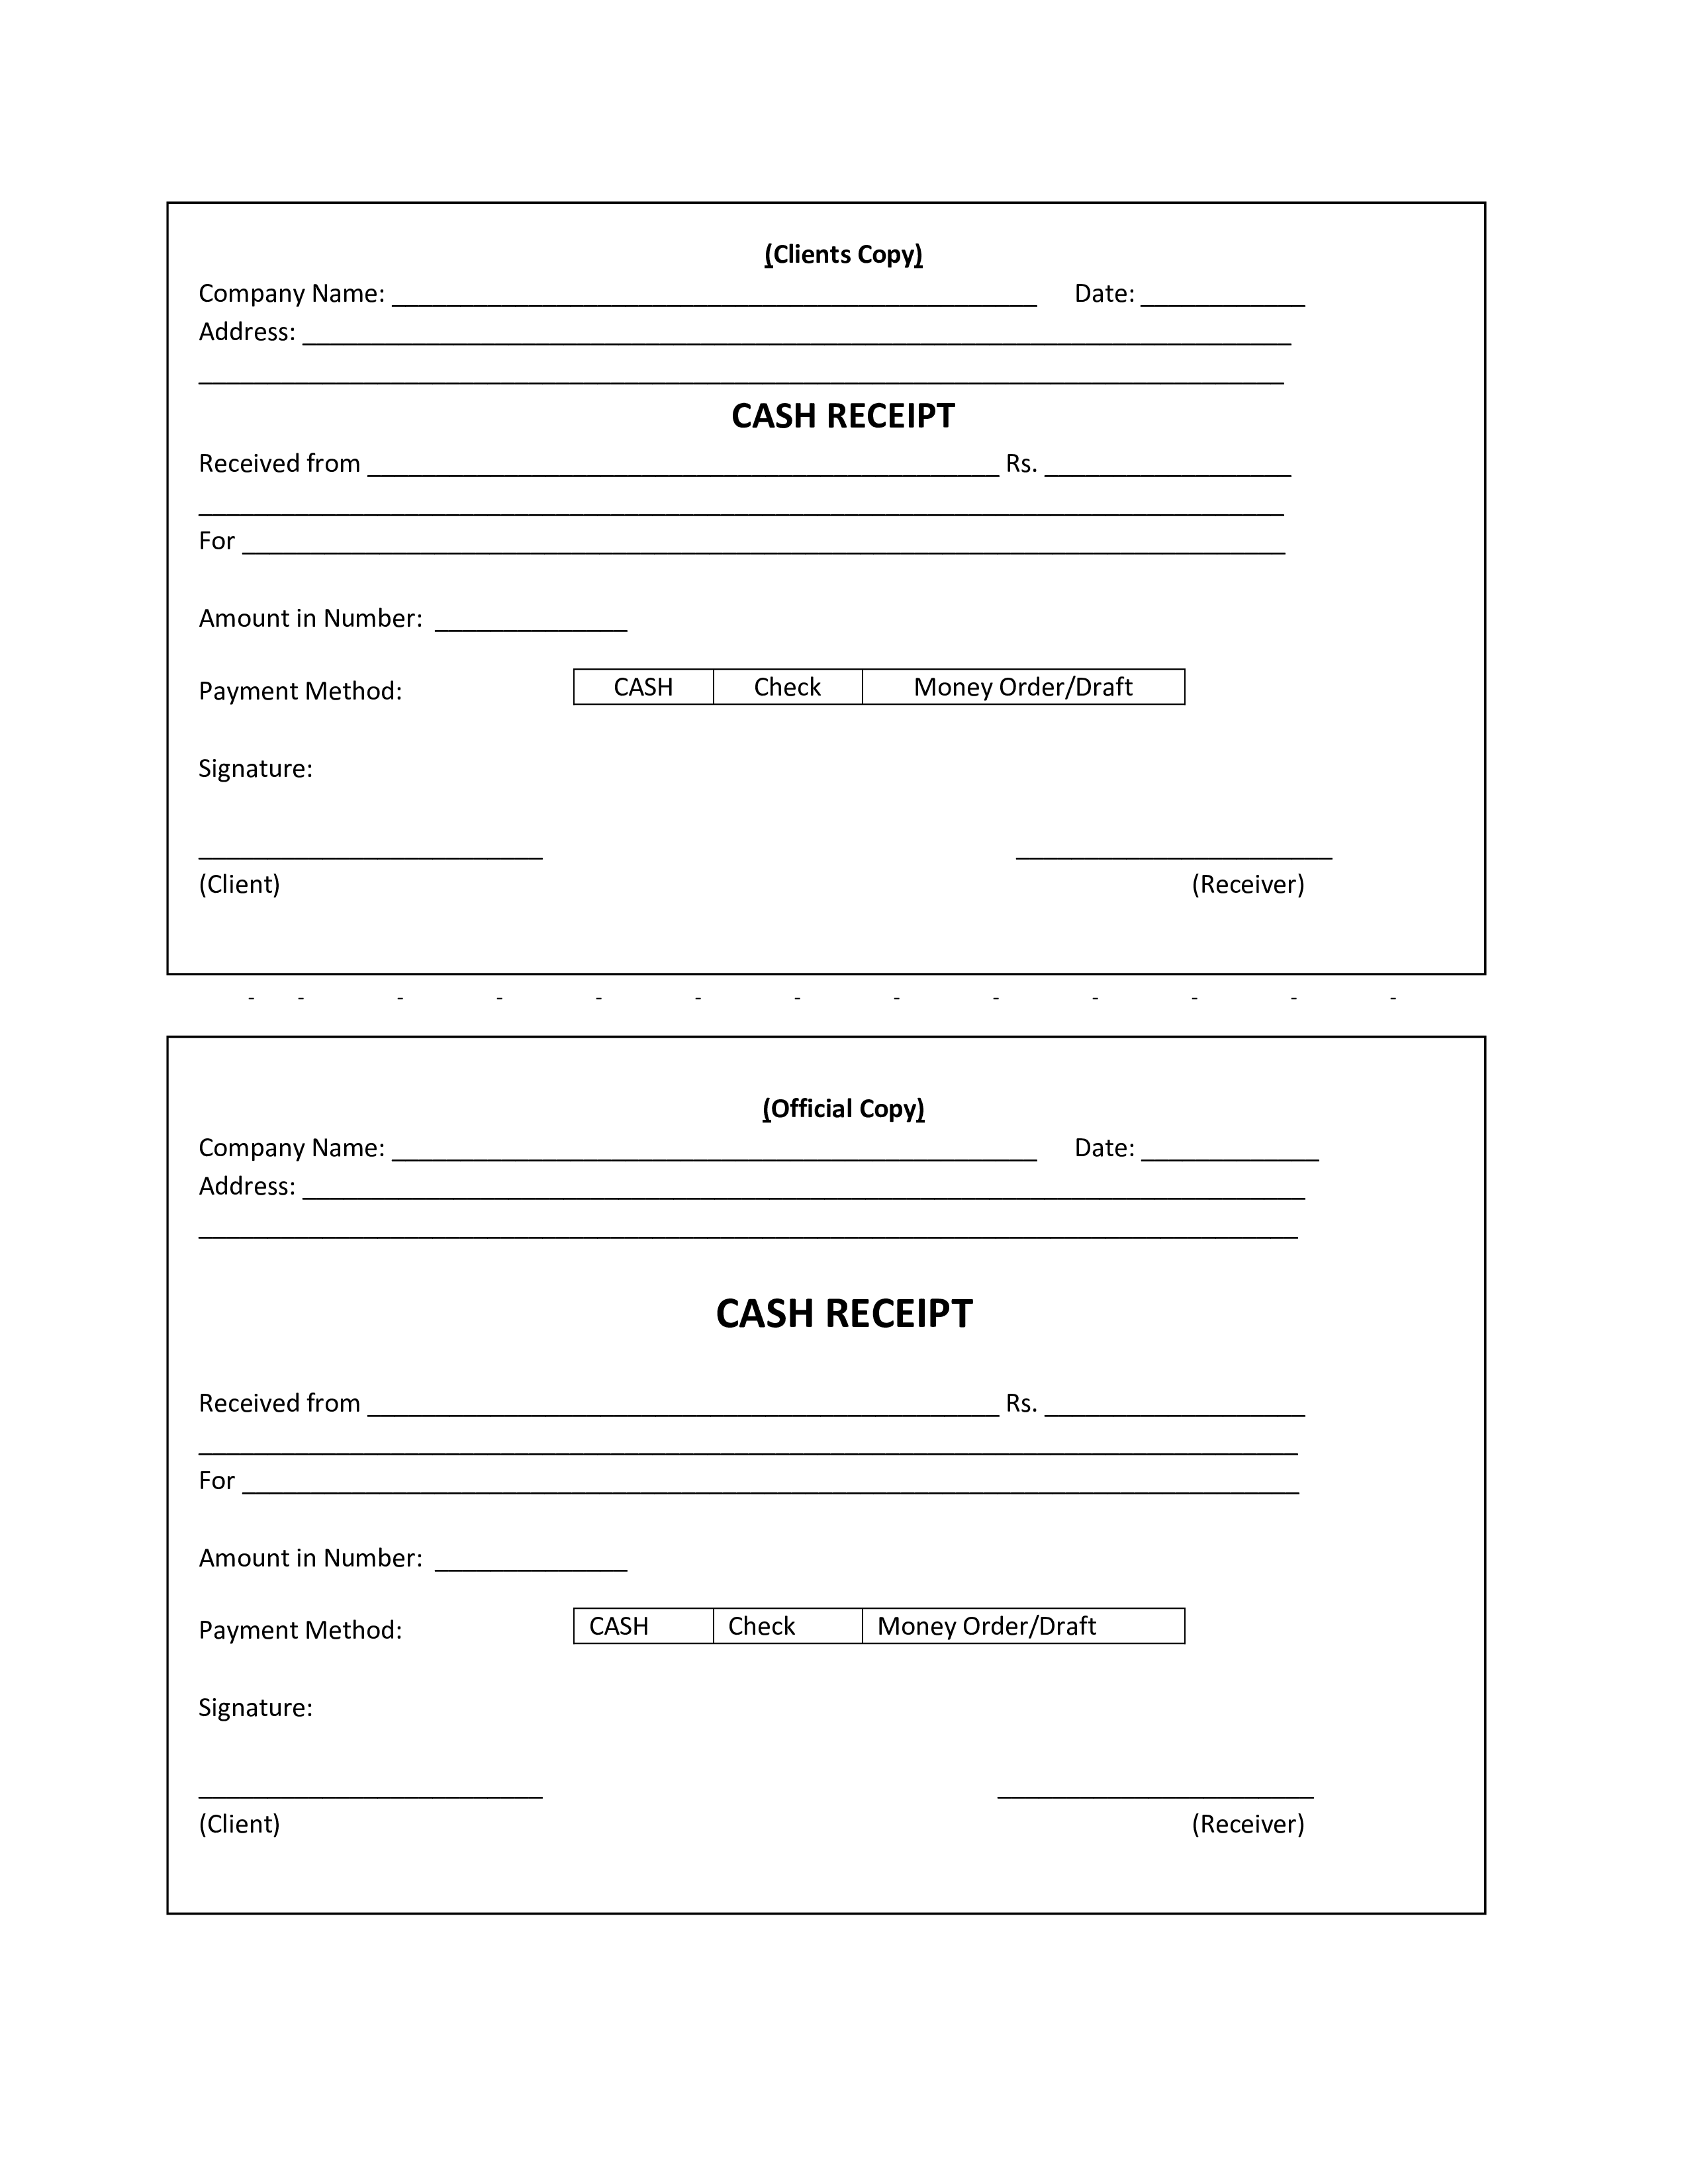 printable-receipt-forms-download-printable-forms-free-online